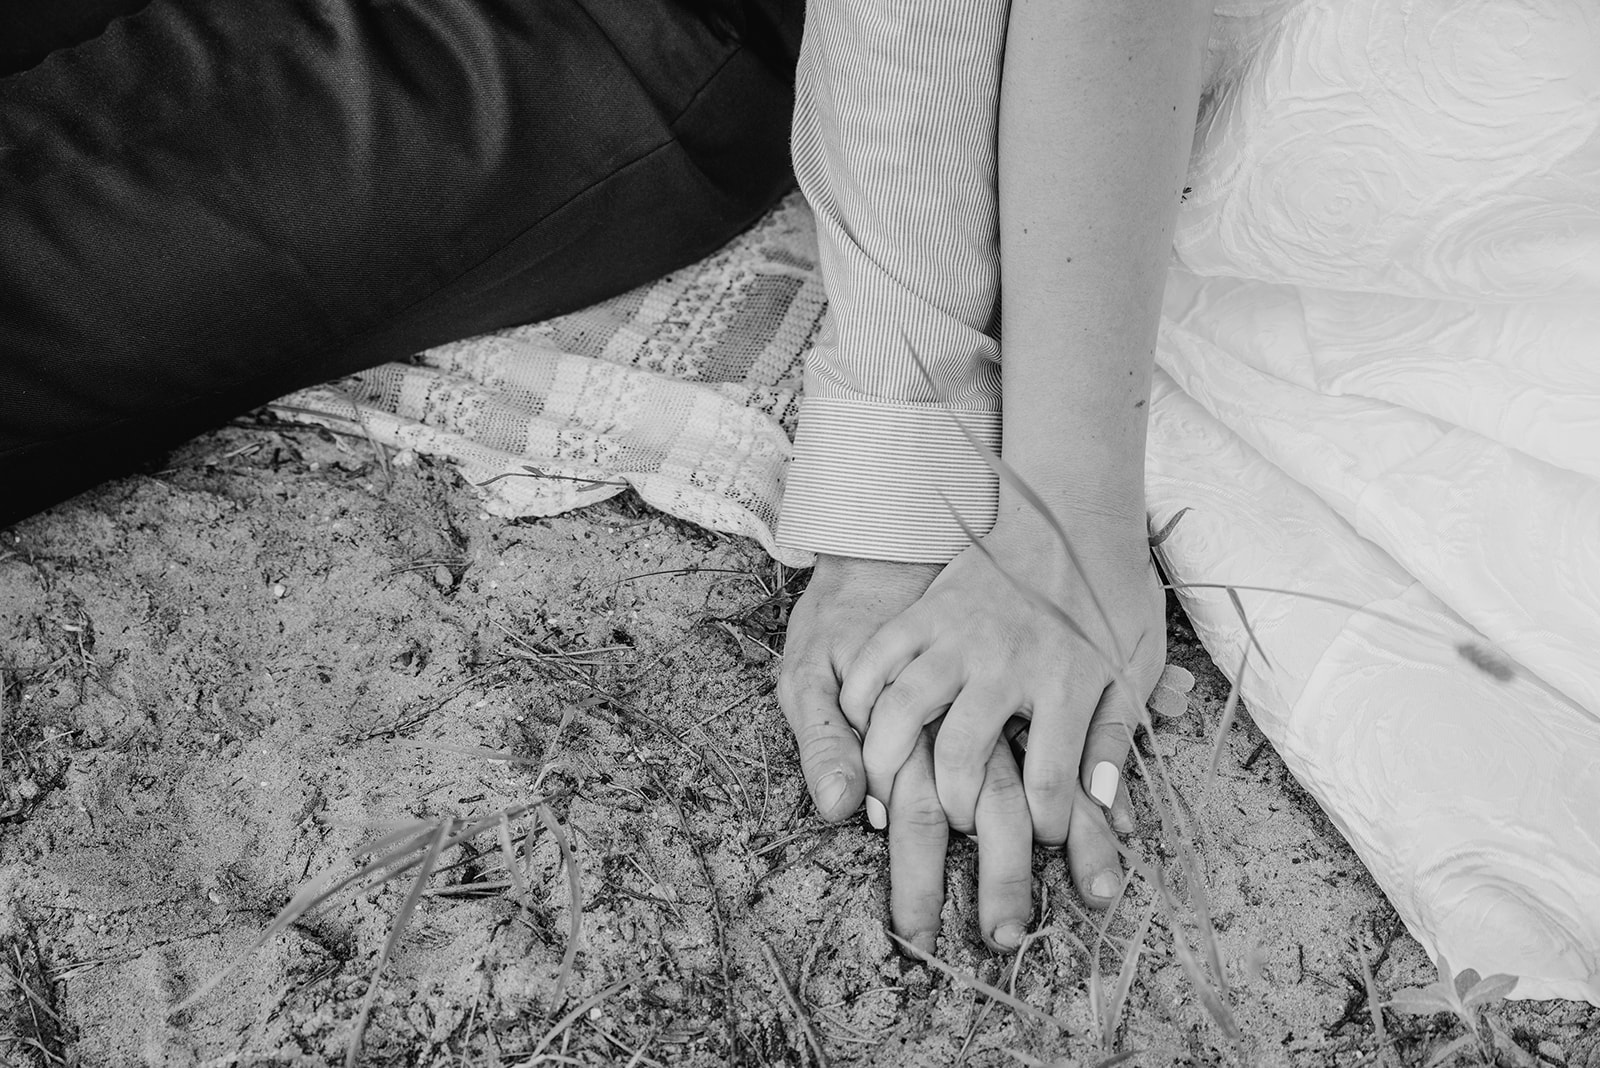 Couple holds hands on the beach in black and white image